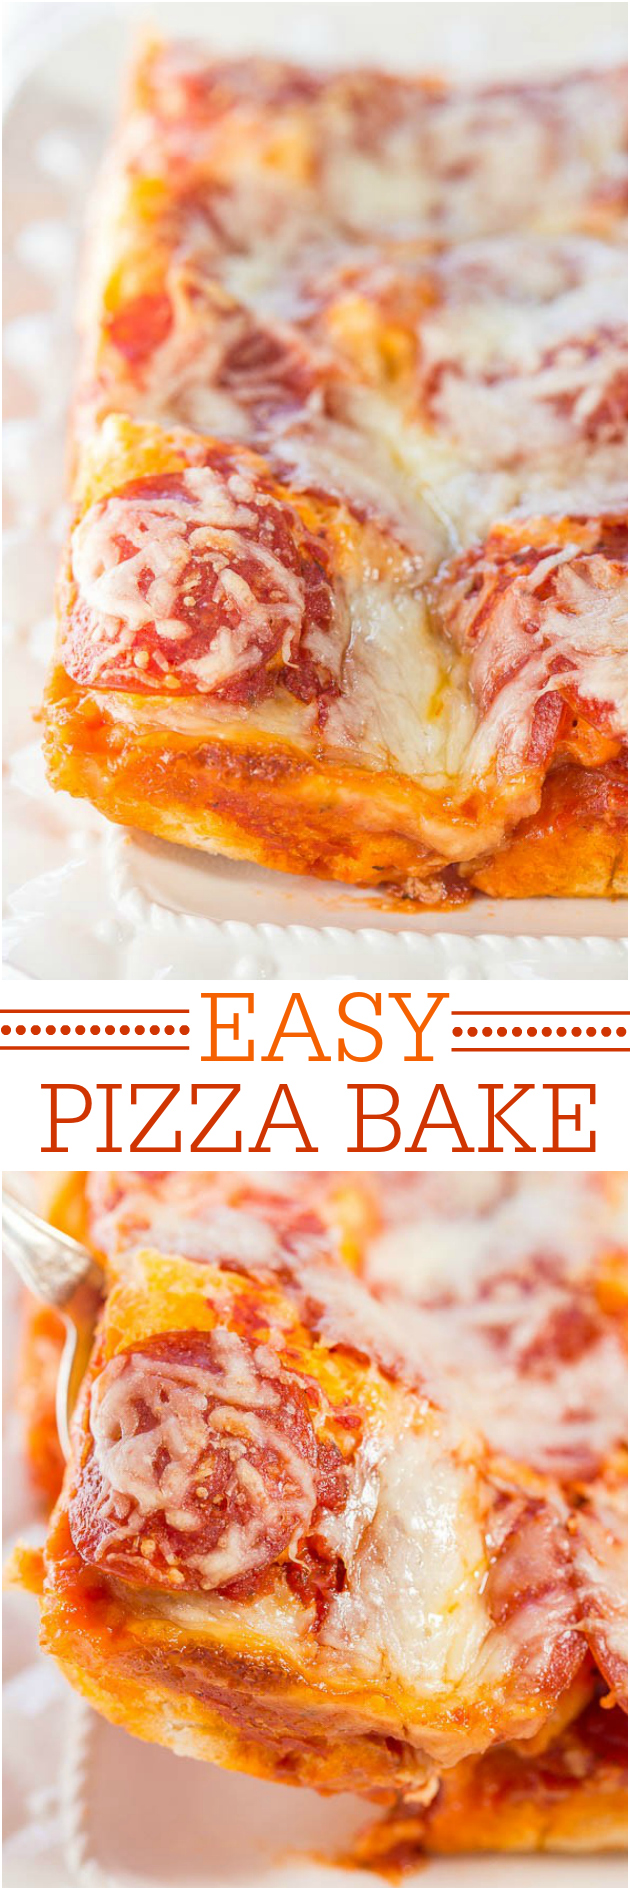 Pepperoni Pizza Bake Recipe (Using Bisquick!) - Averie Cooks